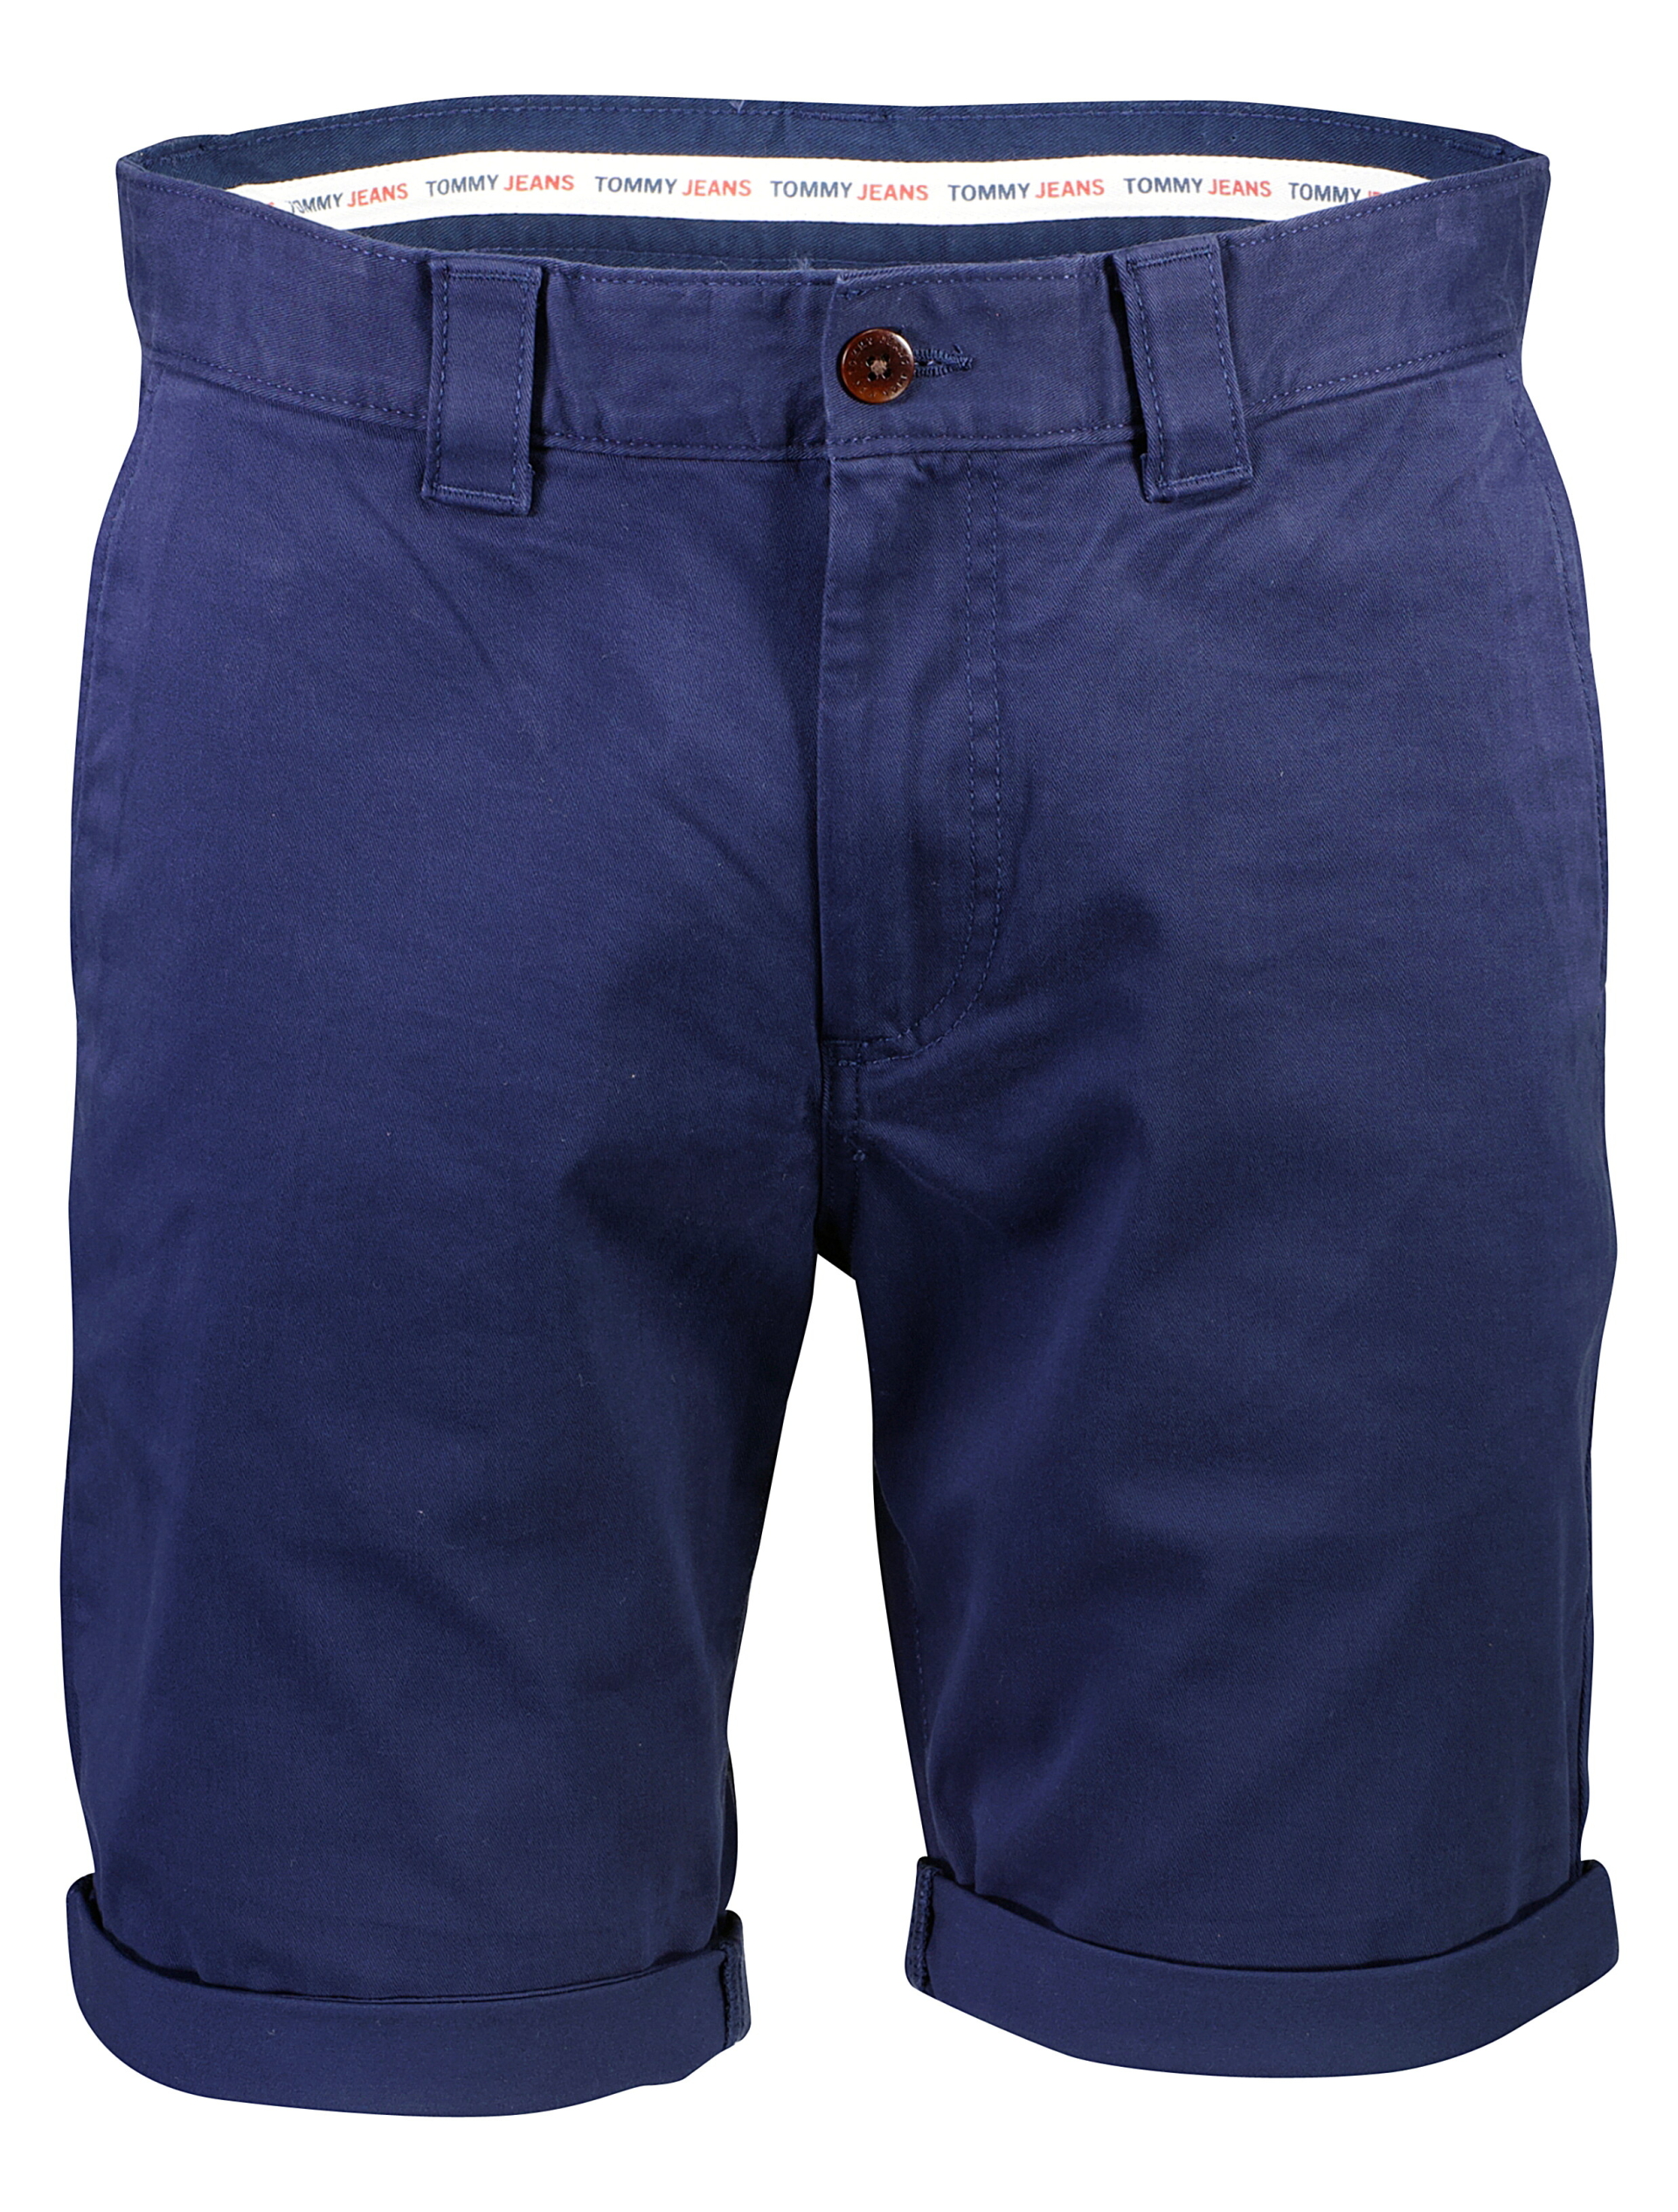 Tommy Jeans Chino shorts blå / c87 navy